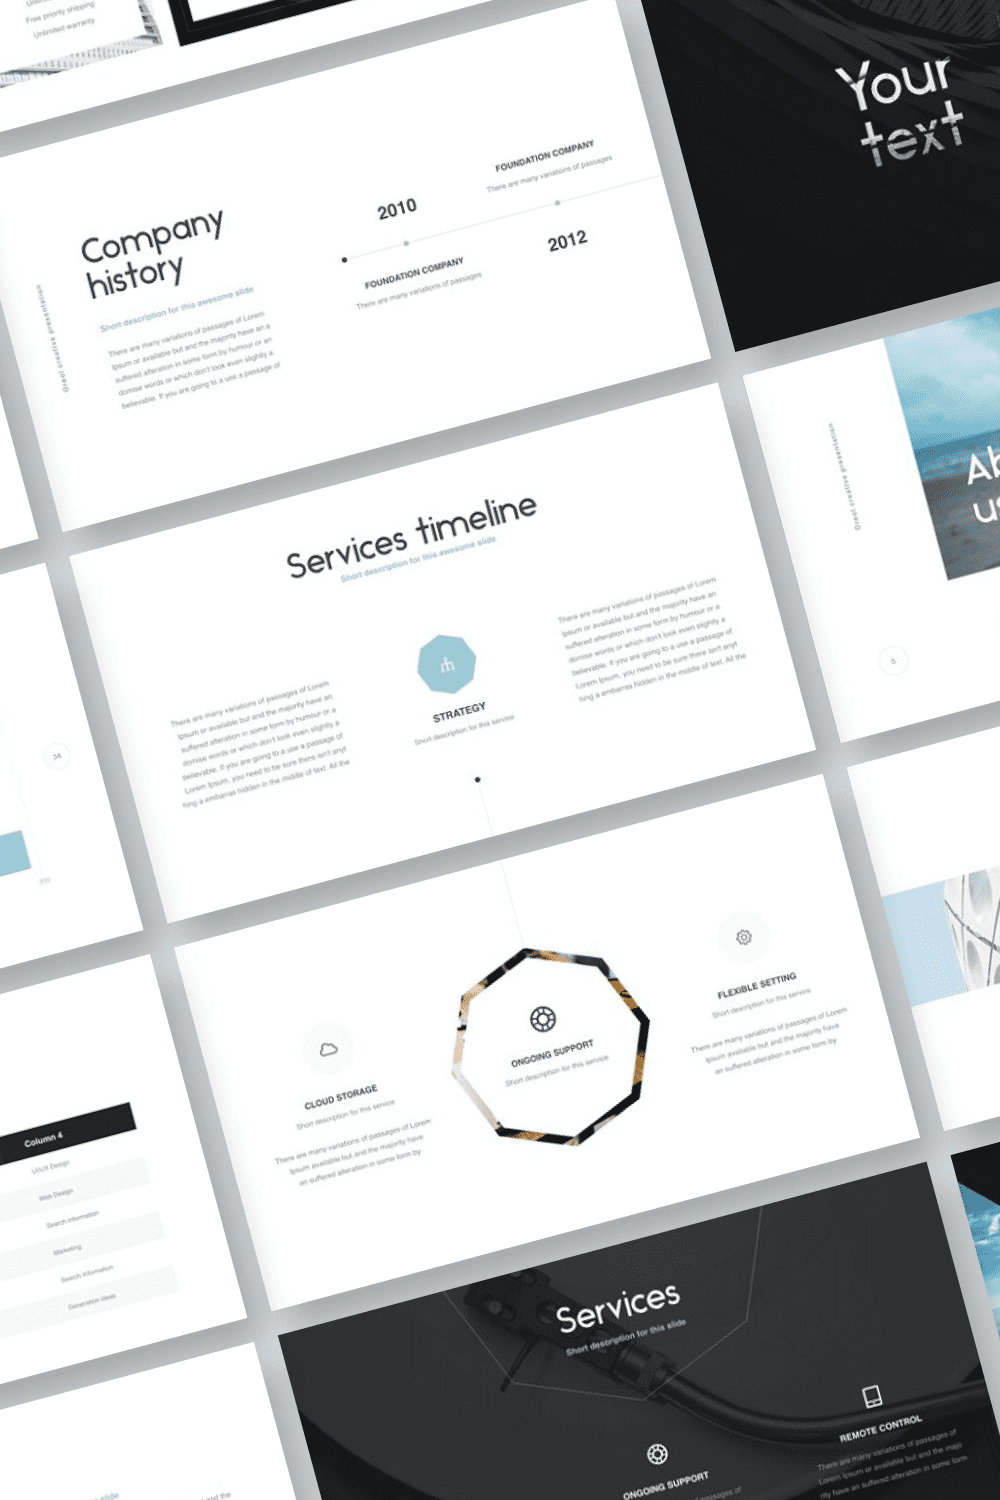 A light and light template that will simply convey even the most complex information.